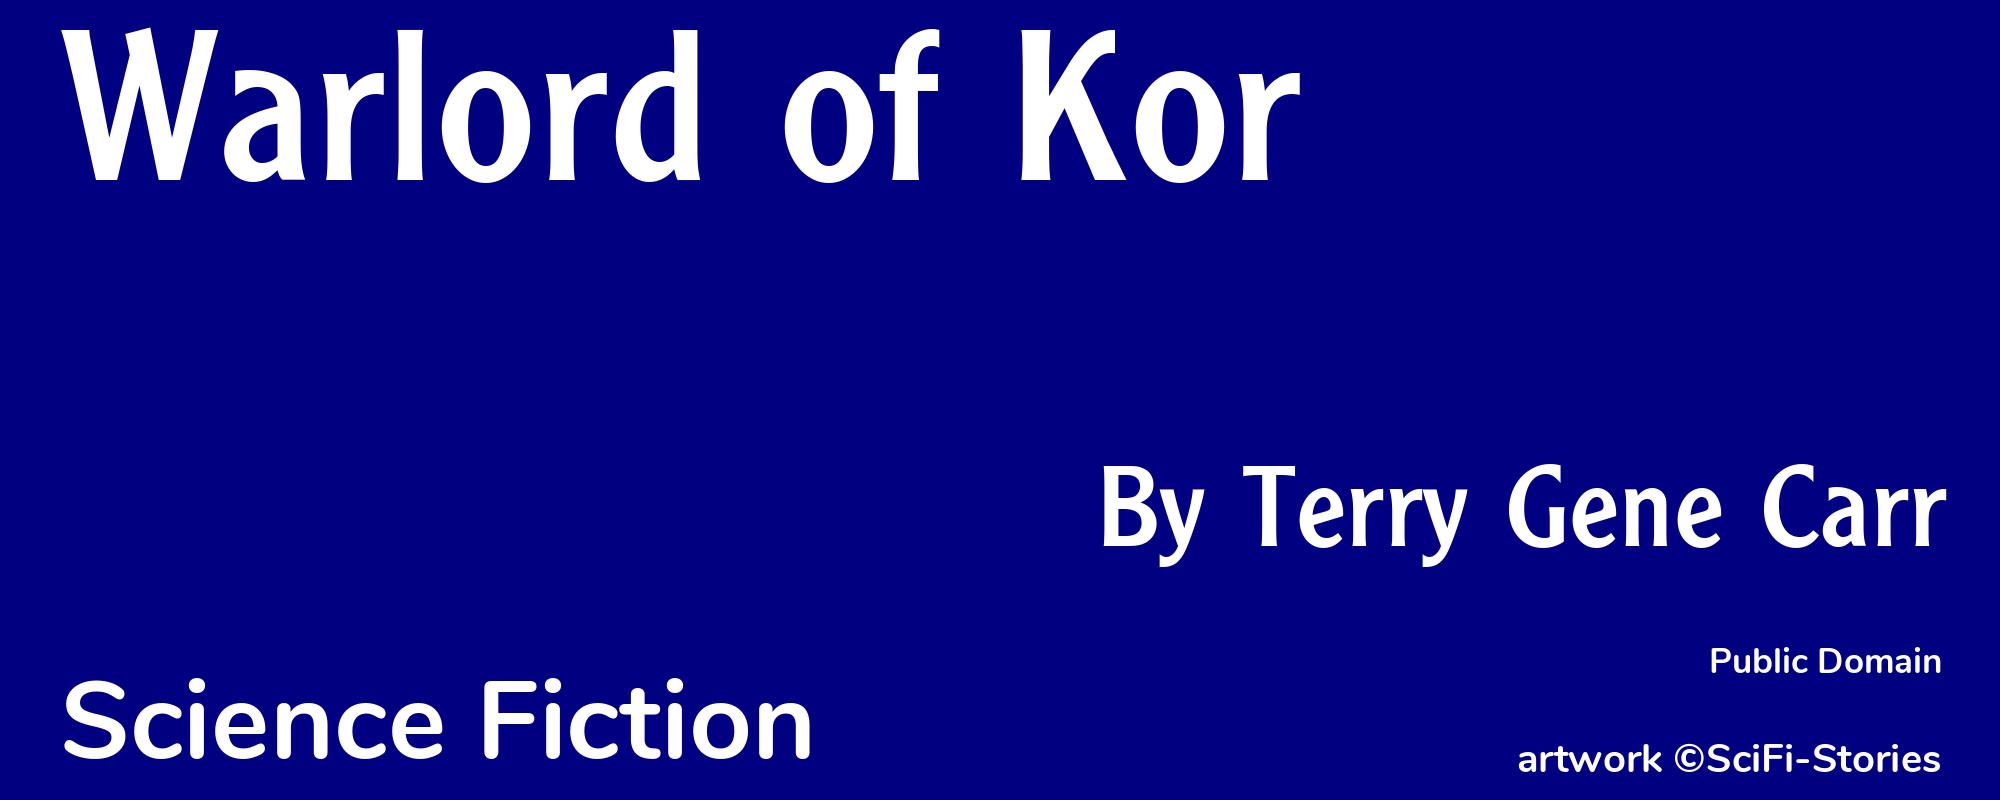 Warlord of Kor - Cover